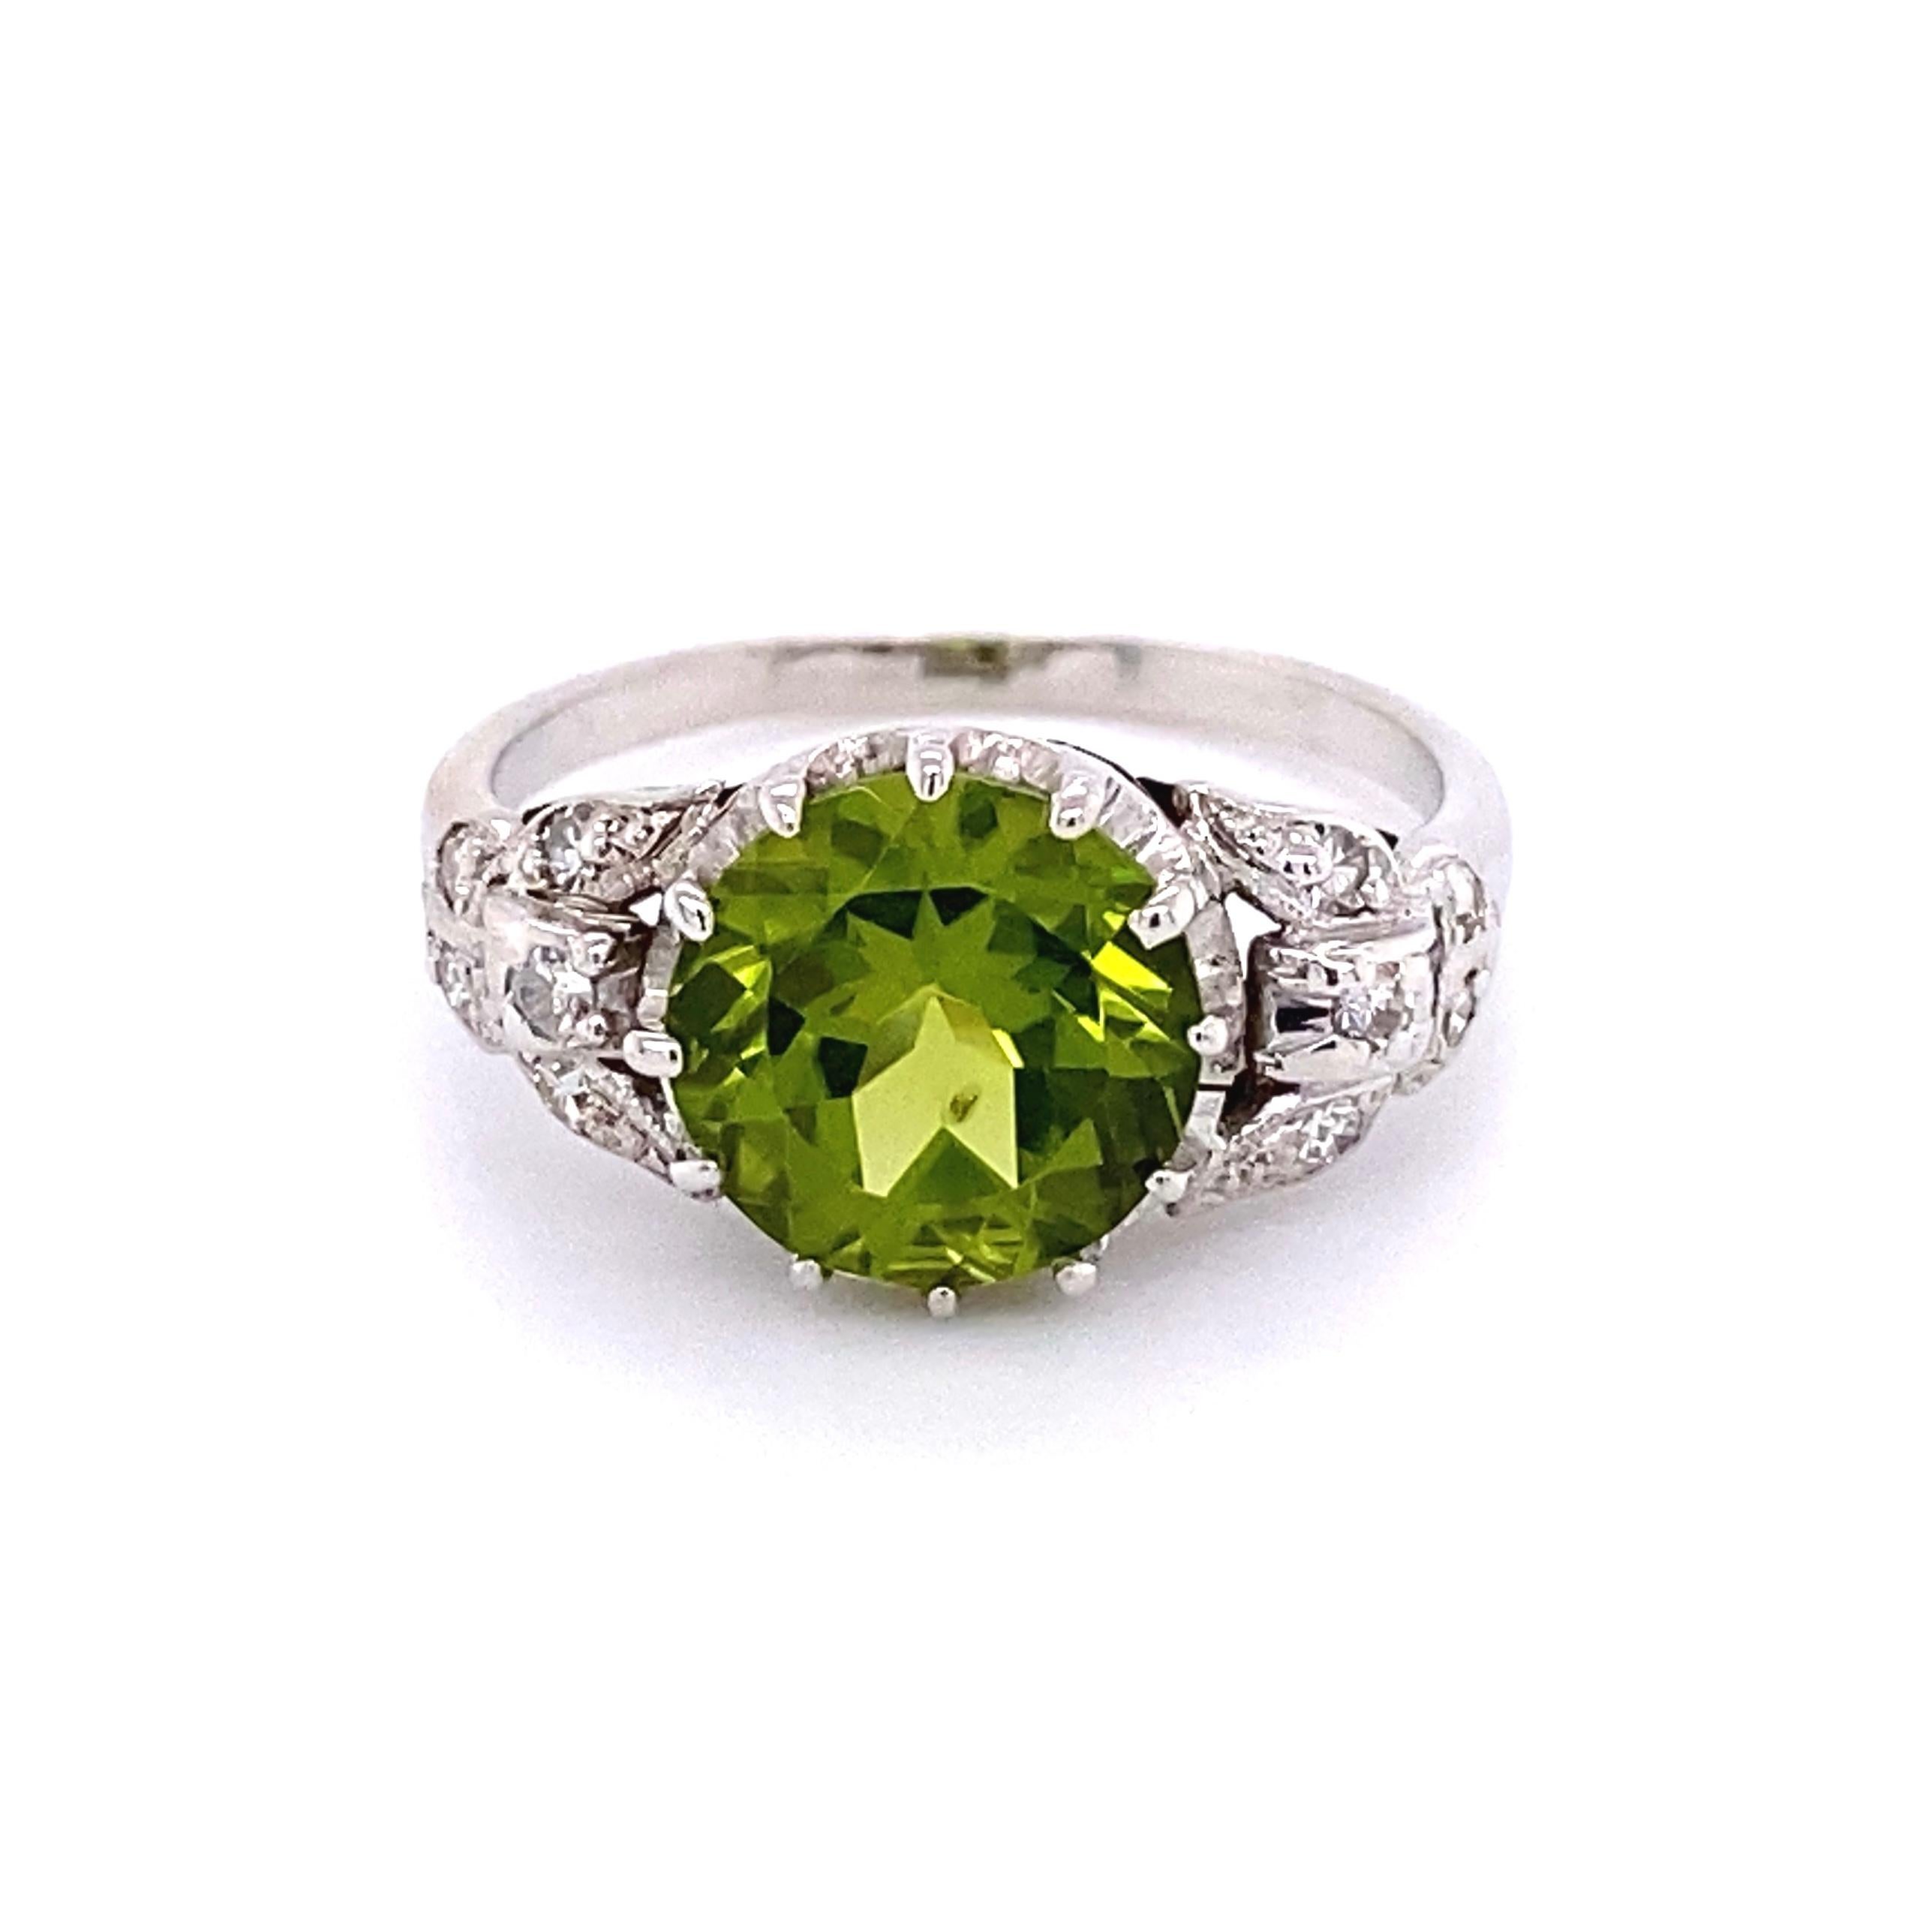 2.54 Carat Peridot and Diamond Art Deco Revival Solitaire Platinum Ring In Excellent Condition For Sale In Montreal, QC